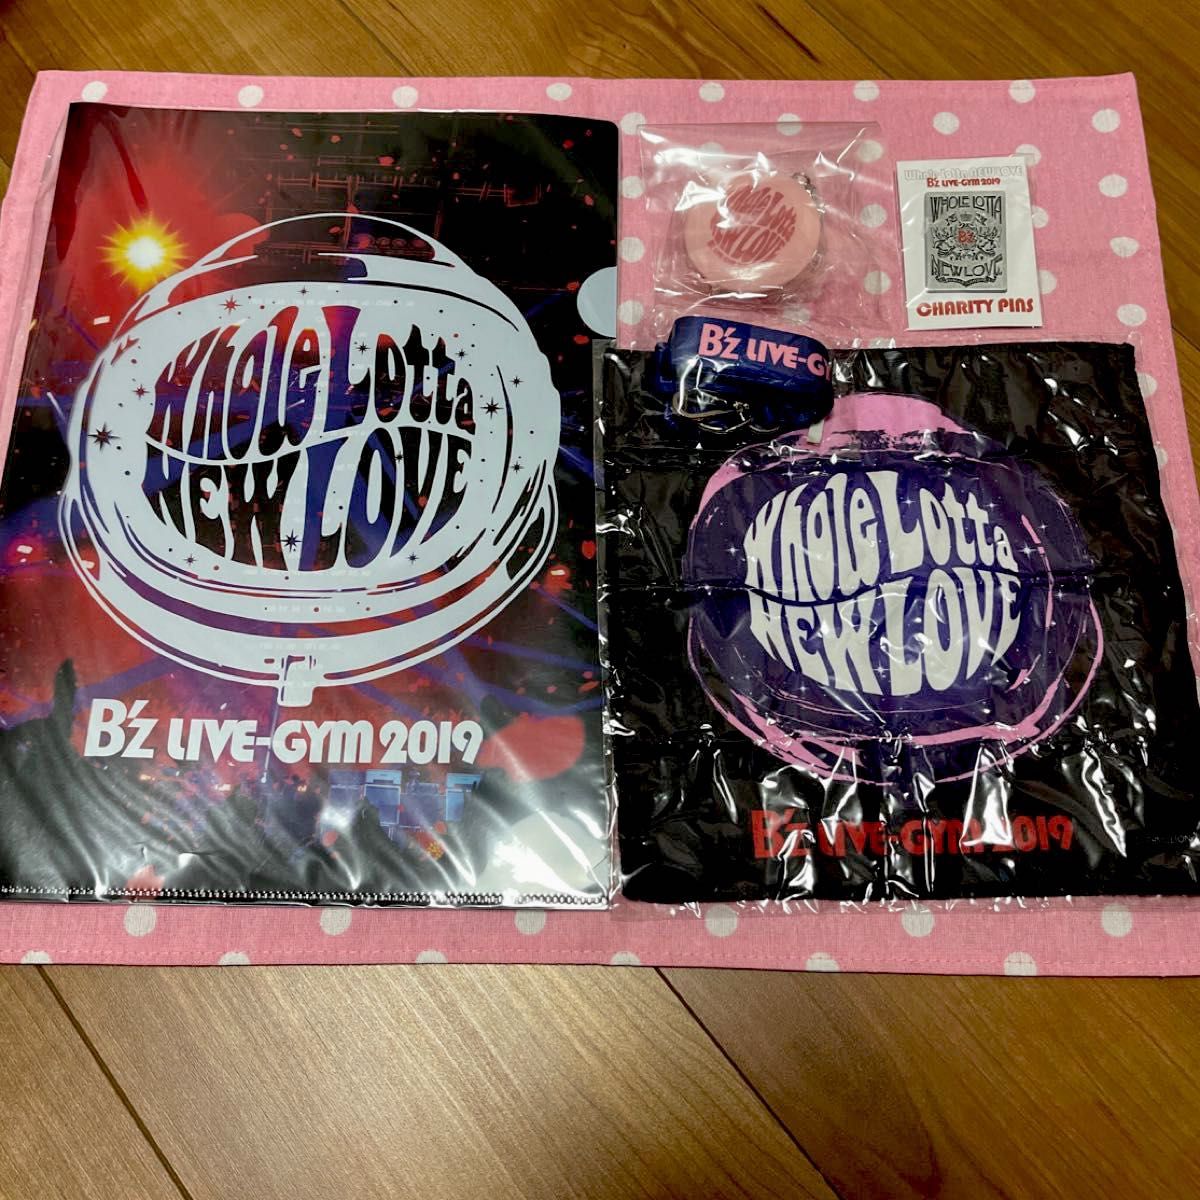 B'z Whole Lotta NEW LOVE LIVE-GYM 2019 ツアーグッズ　未使用 8点セット